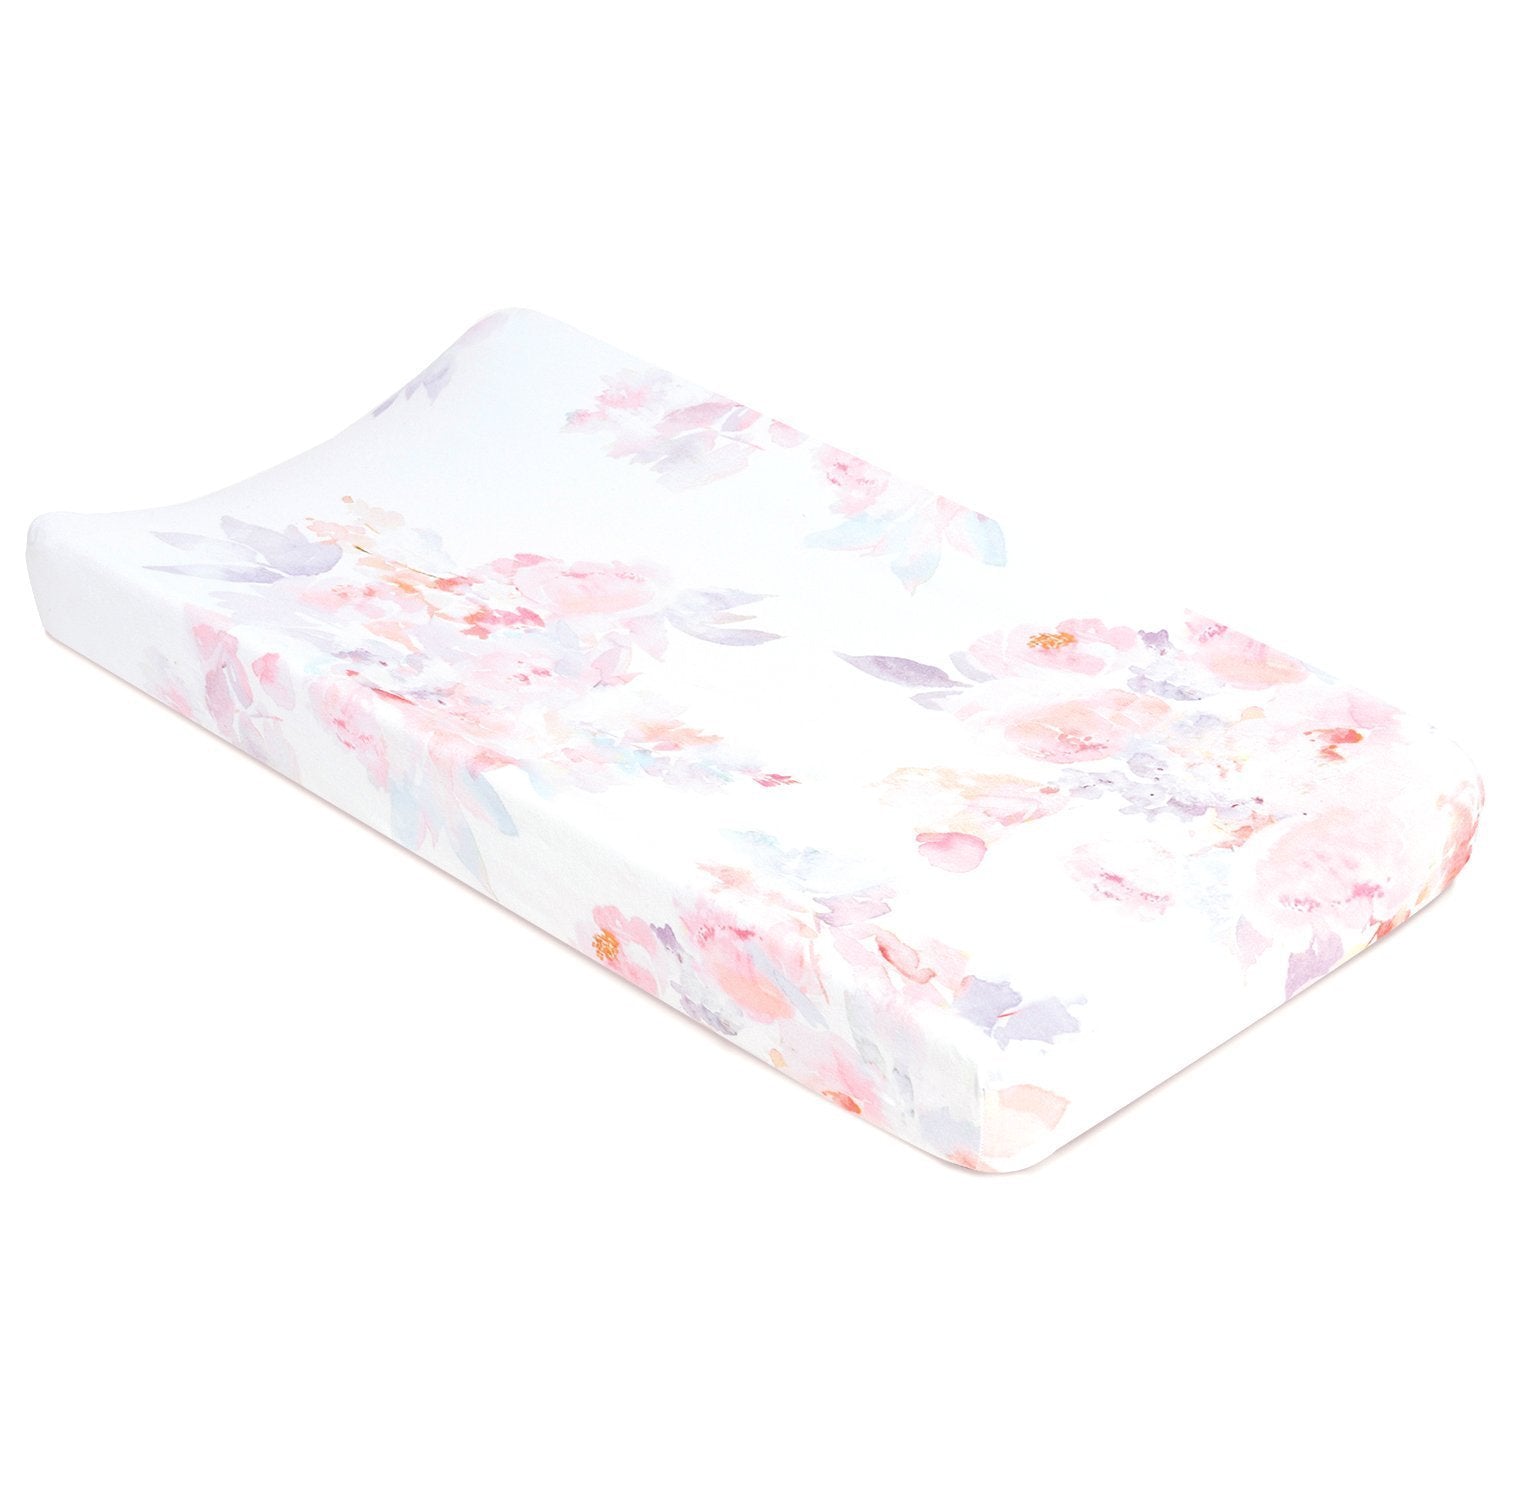 Oilo Prim Jersey Changing Pad Cover